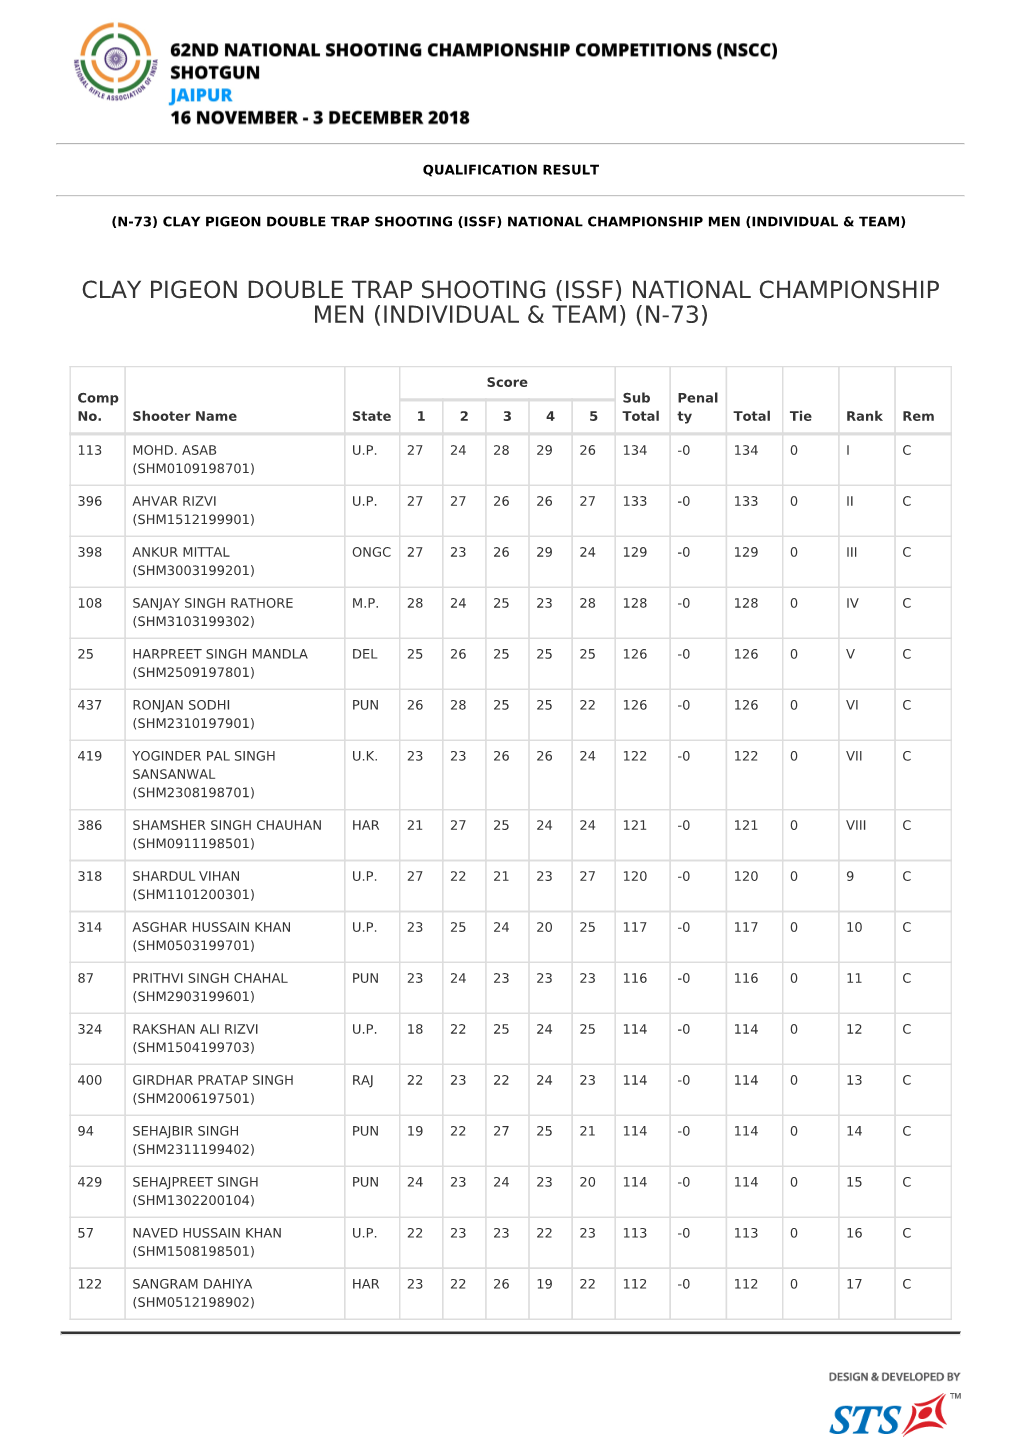 Clay Pigeon Double Trap Shooting (Issf) National Championship Men (Individual & Team)